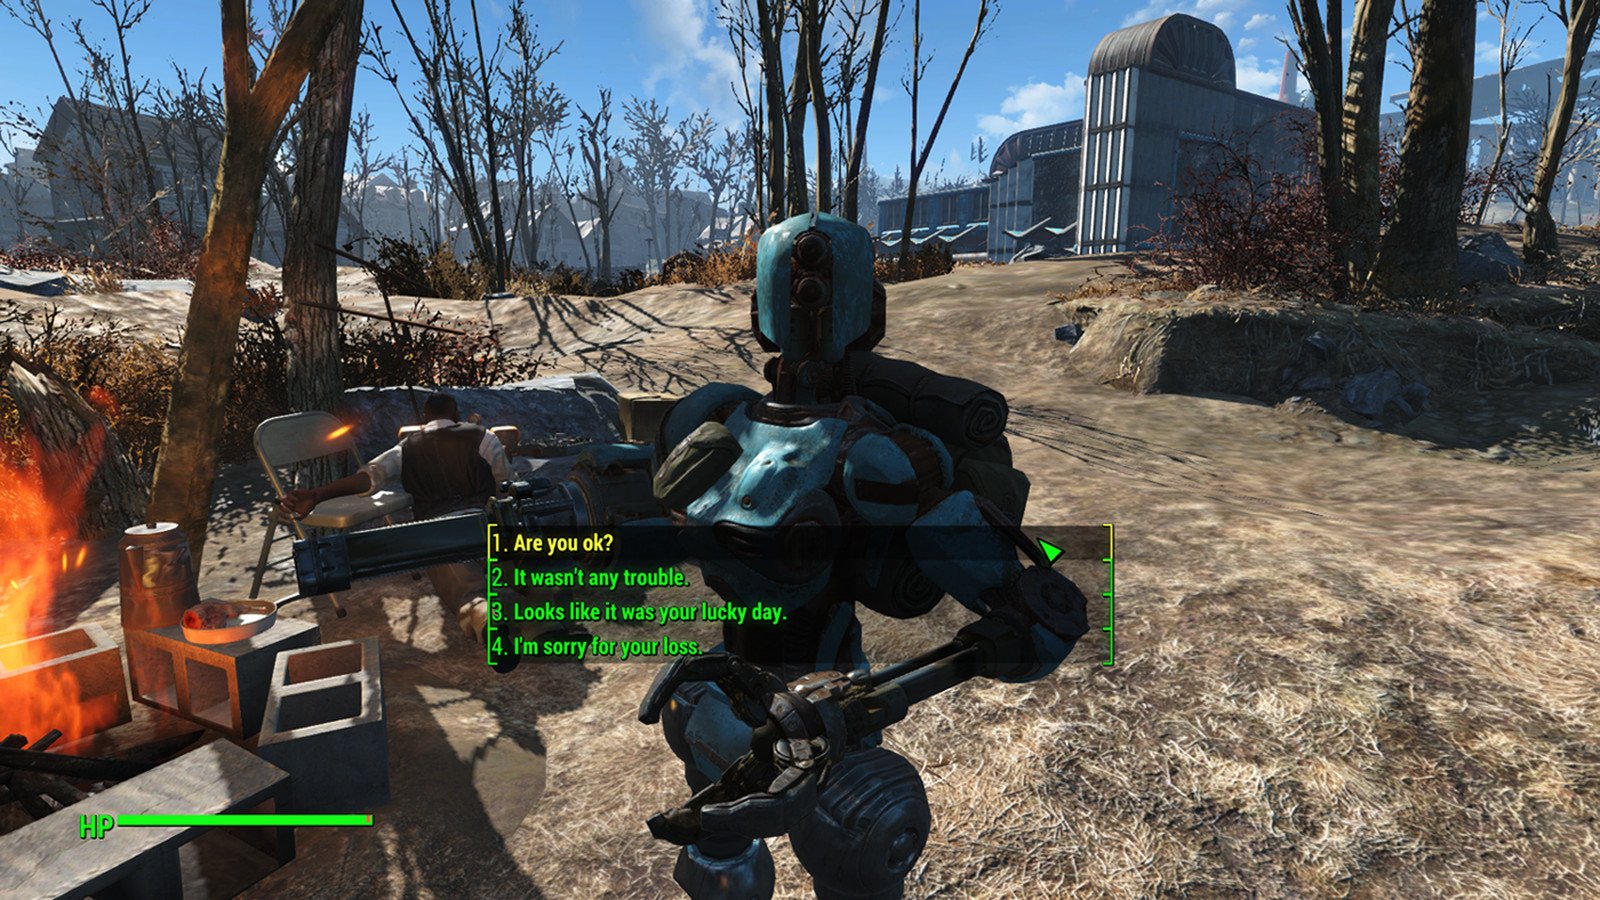 Fallout 4 mod support on PS4 remains âunder evaluationâ